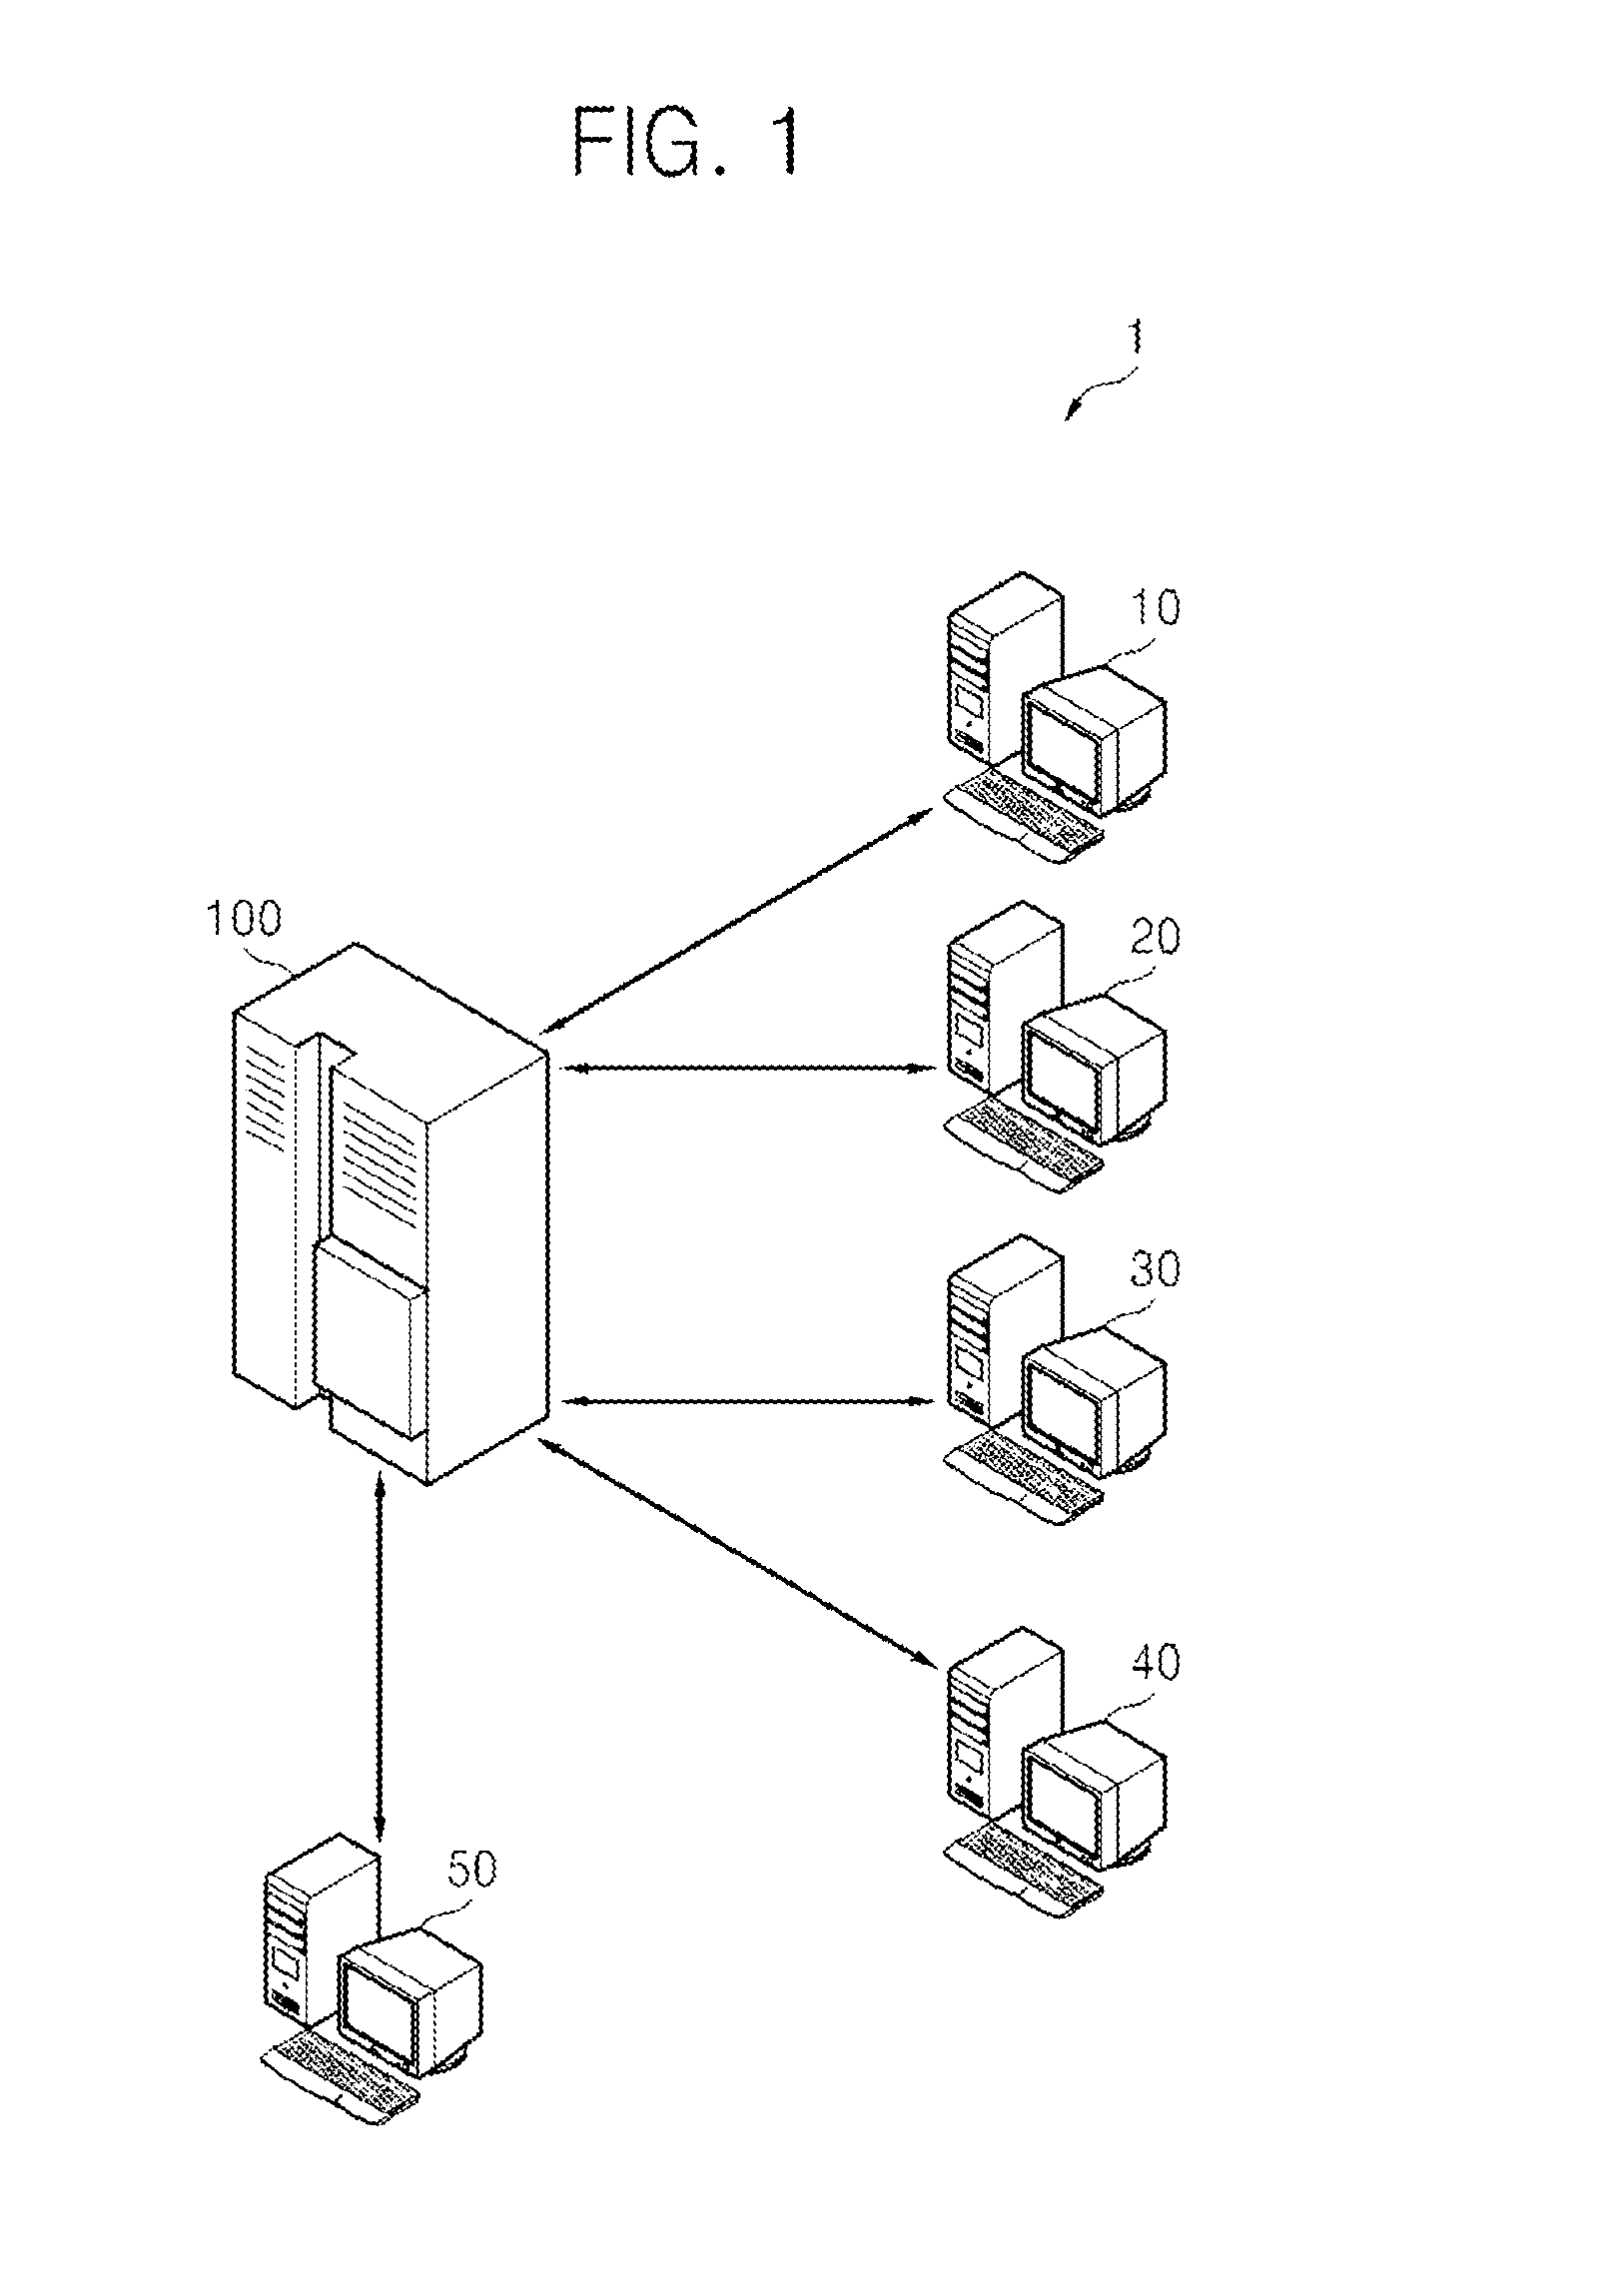 Online discussion ability authentication method and system for performing method